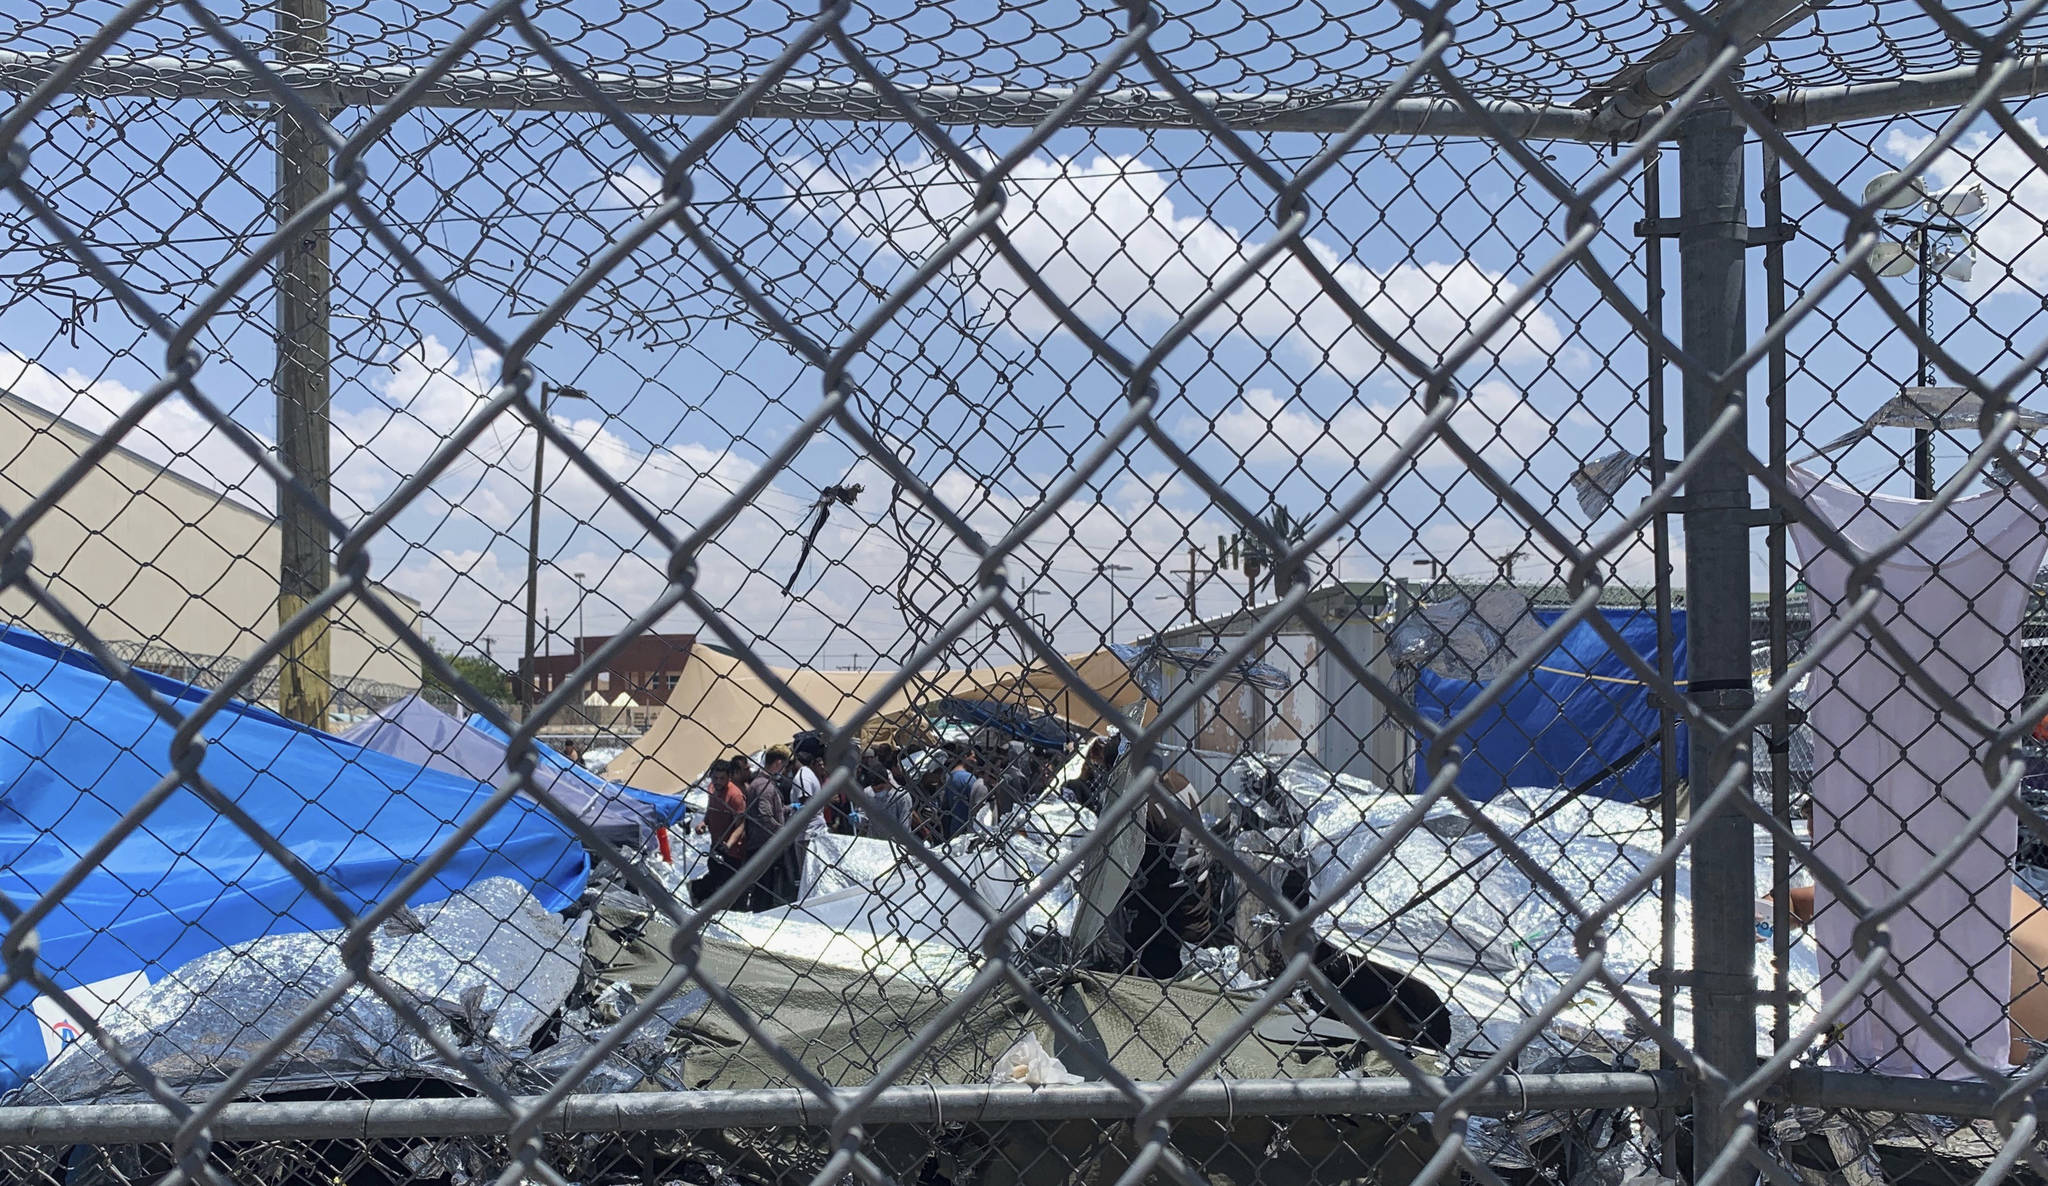 In this June 1, 2019, photo, provided by New Mexico State University professor Neal Rosendorf, migrants are seen through fencing inside a temporary outdoor encampment where they’re waiting to be processed in El Paso, Texas. Rosendorf said it resembled a “human dog pound.” (Neal Rosendorf via AP)